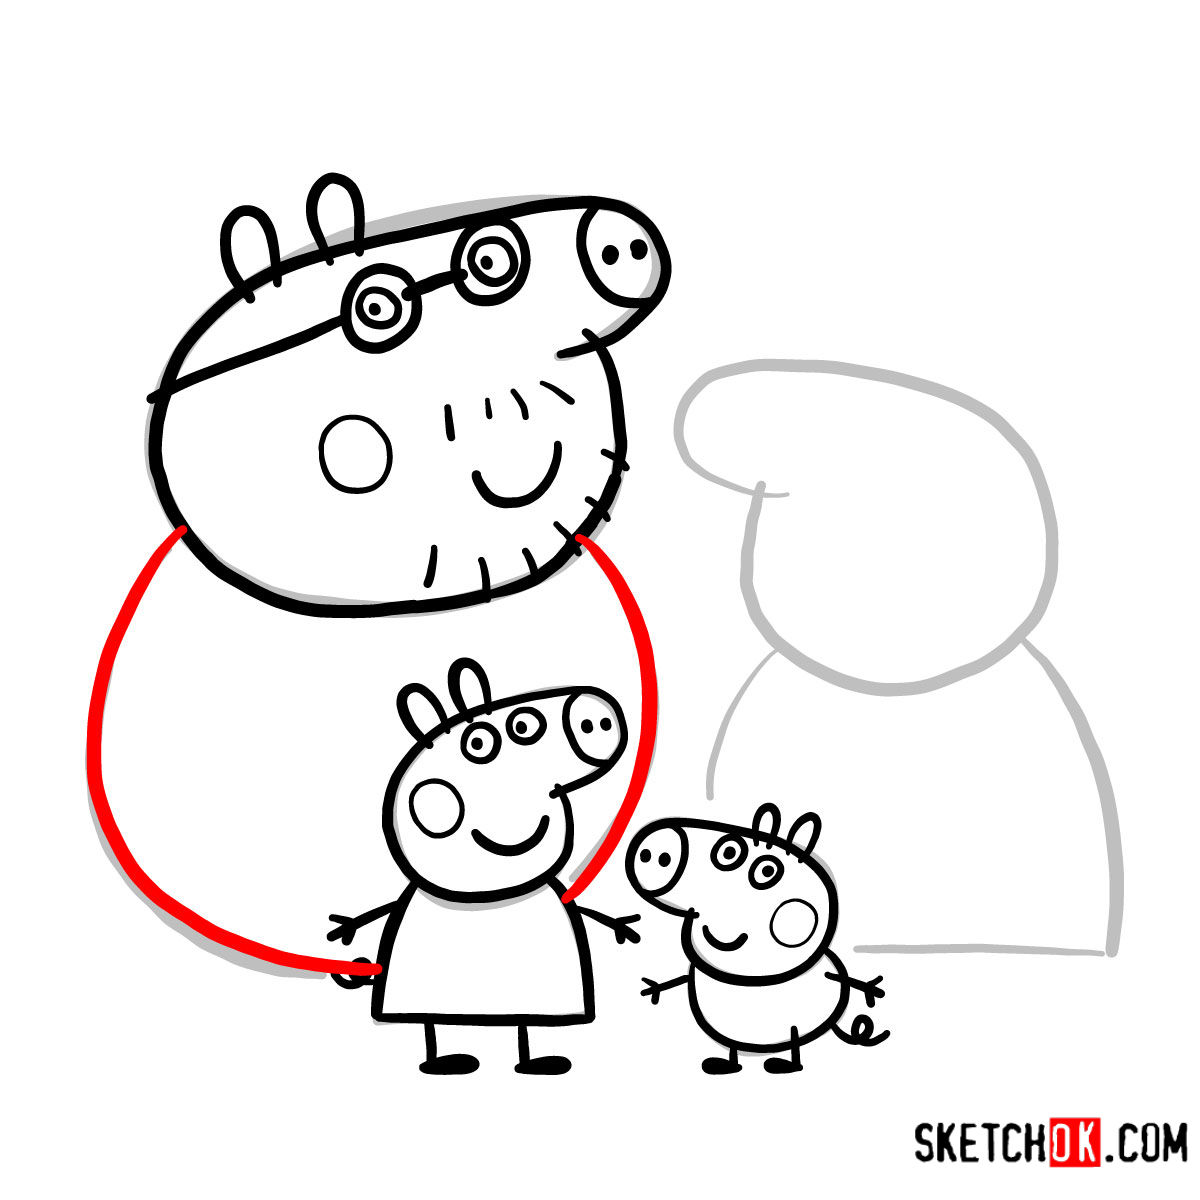 How to draw Peppa Pig's family together - Sketchok easy drawing guides